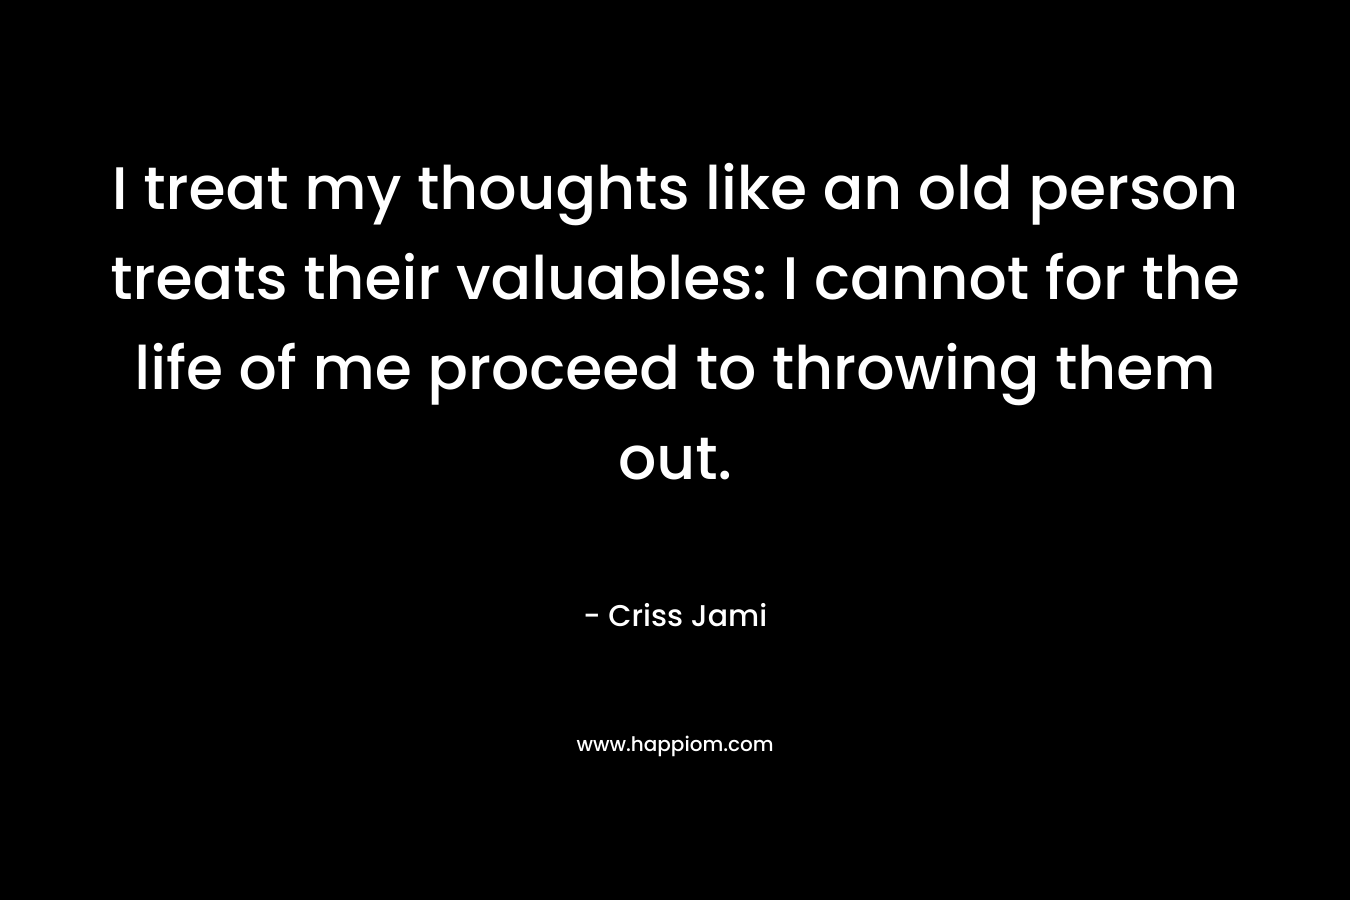 I treat my thoughts like an old person treats their valuables: I cannot for the life of me proceed to throwing them out. – Criss Jami